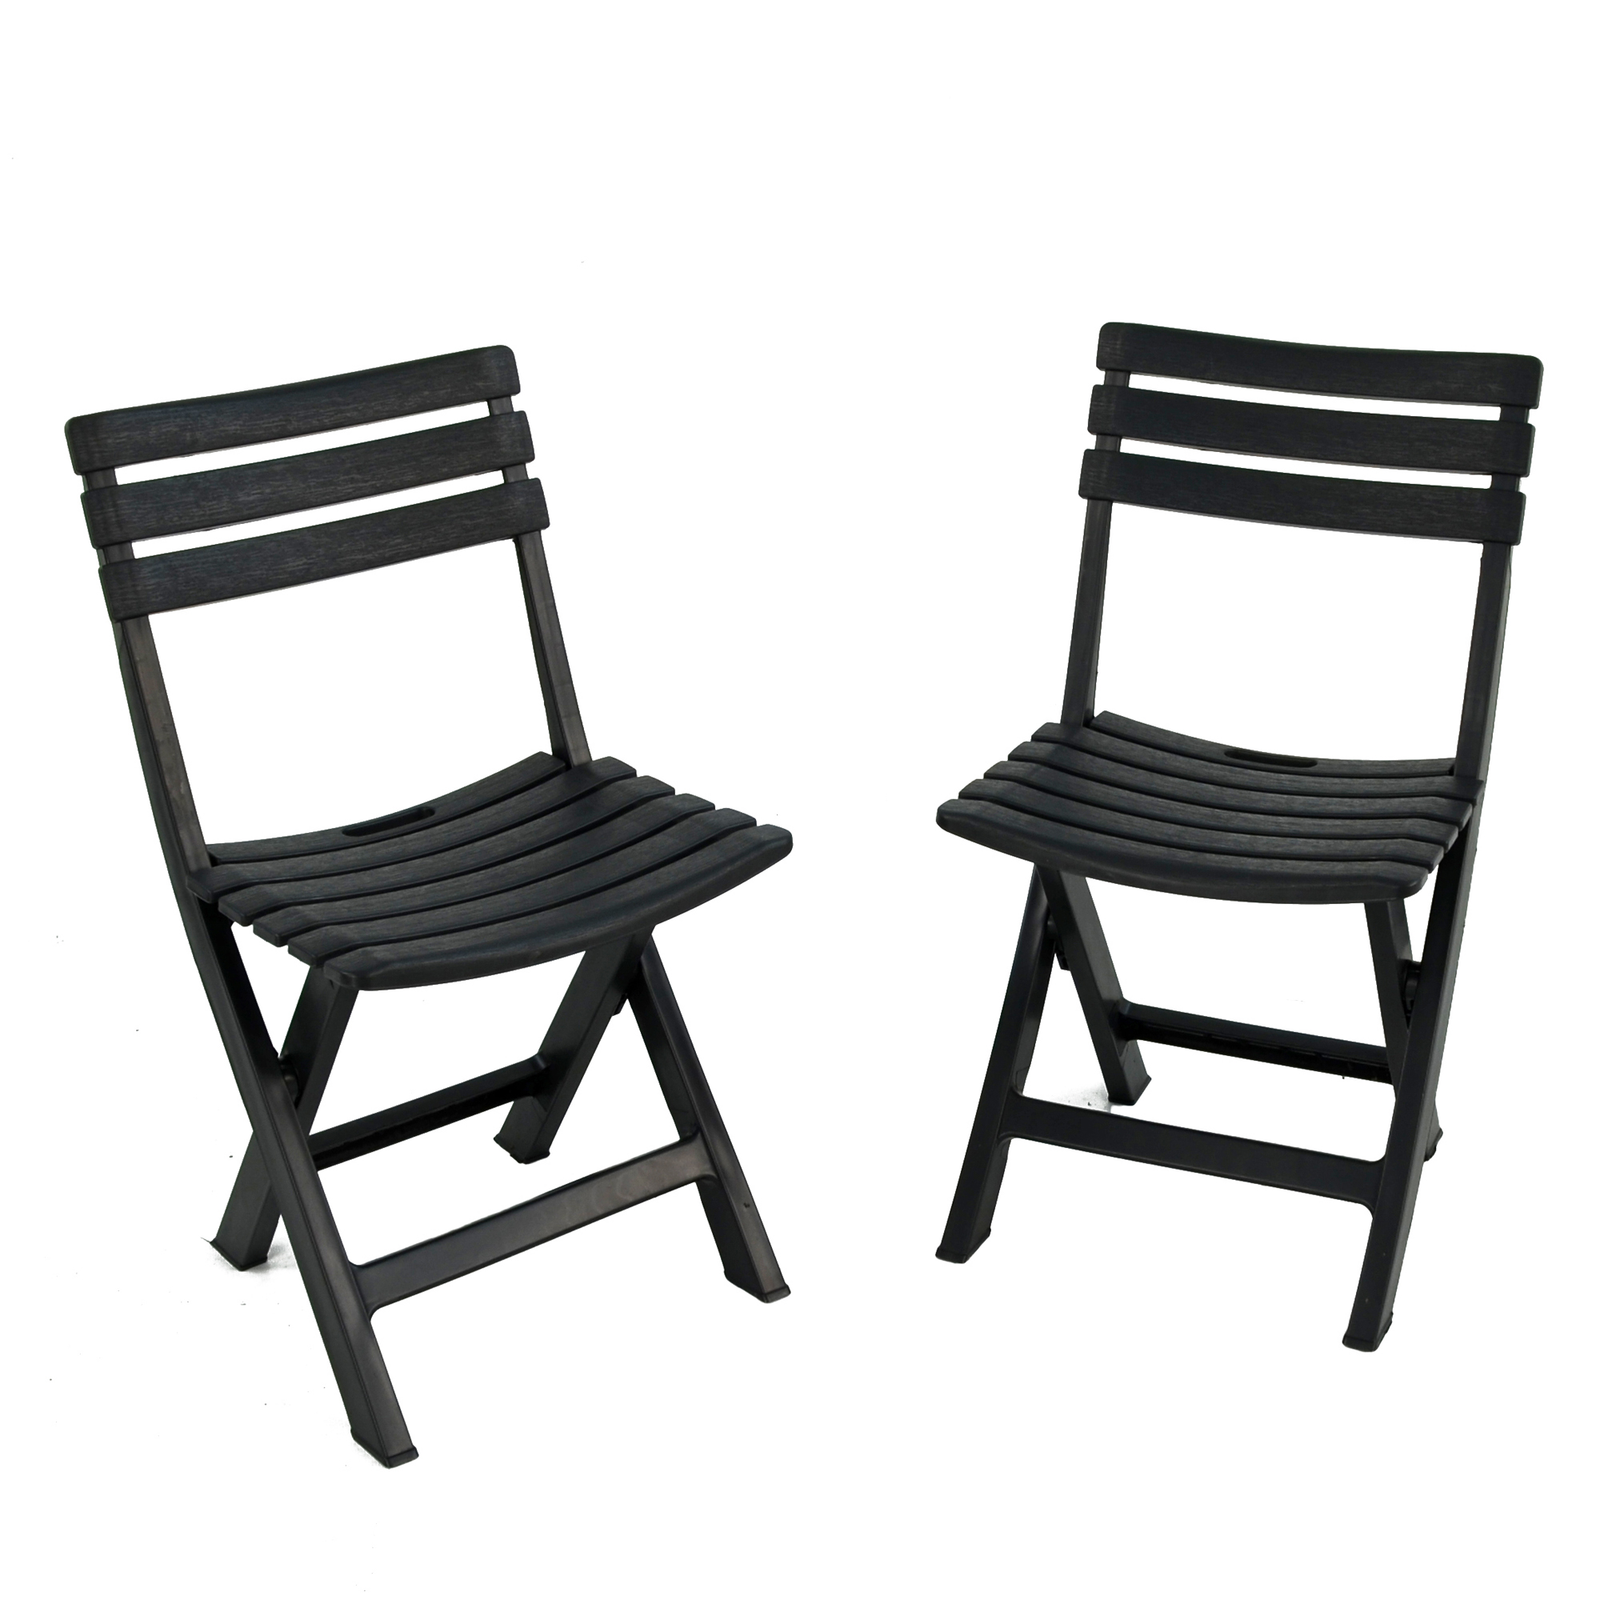 Trabella Brescia Folding Chair Anthracite Grey (Pack of 2) Chairs Trabella   